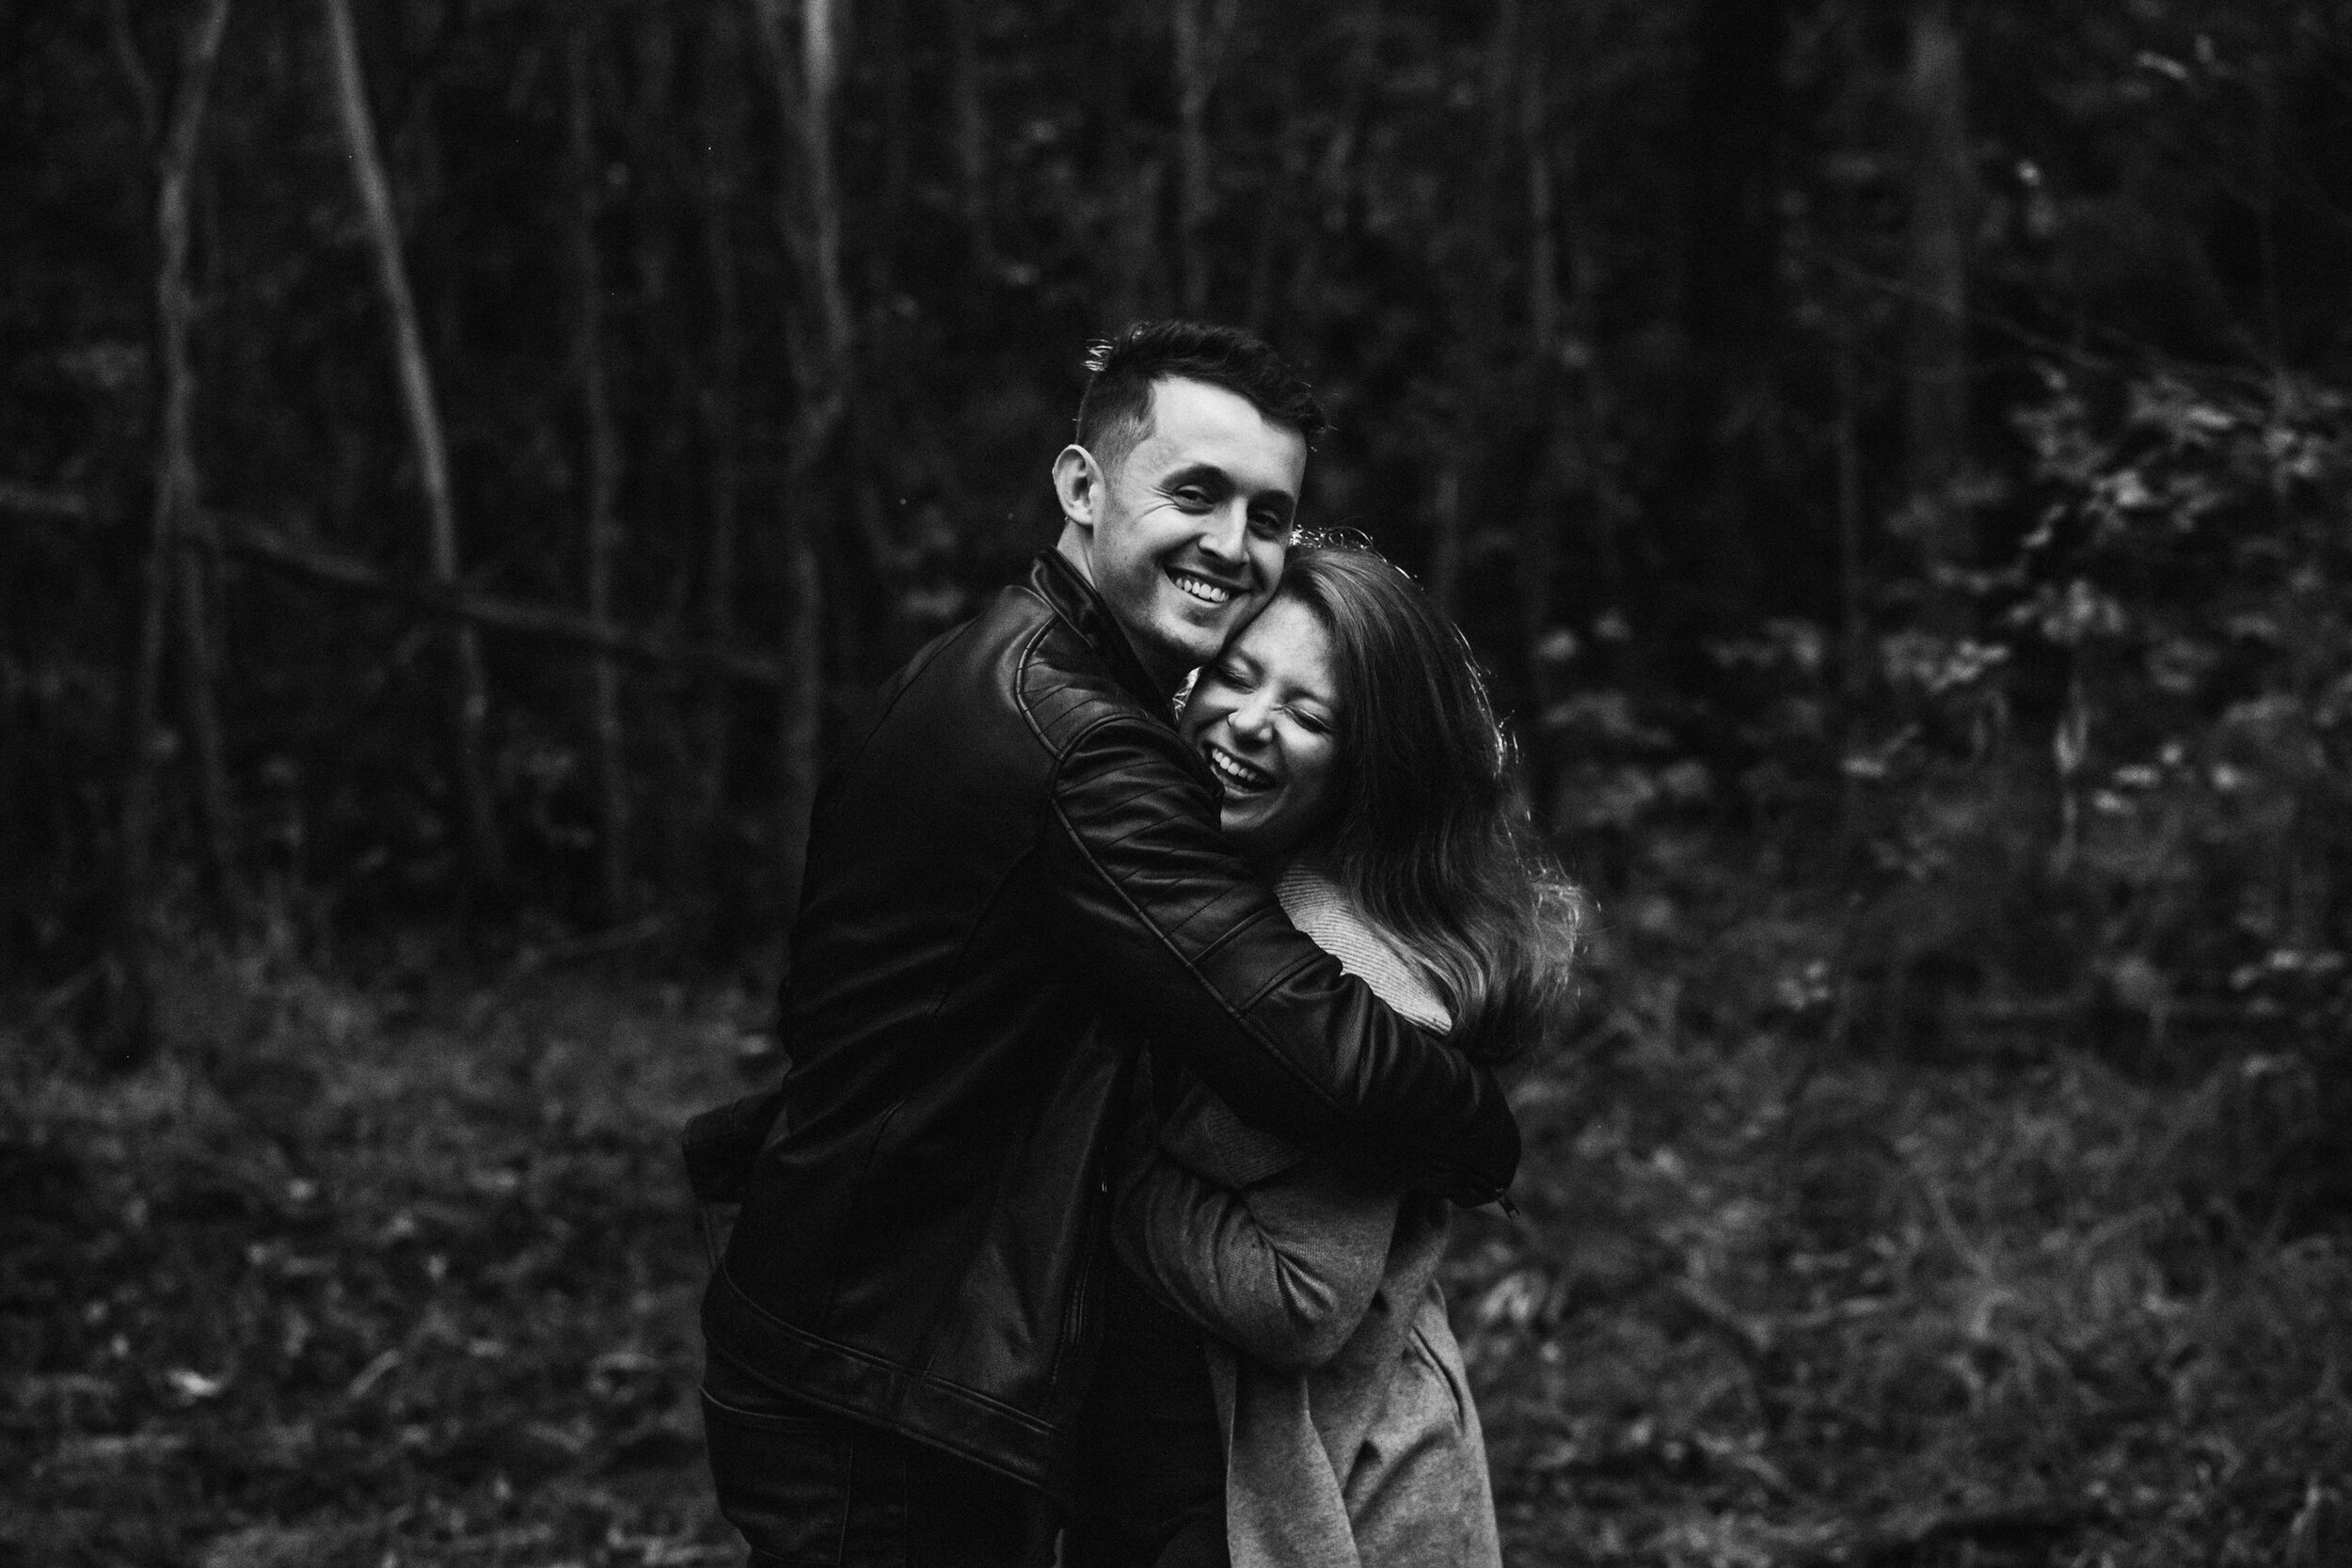 Wintery Autumn Adelaide Hills Engagement Session 25.JPG